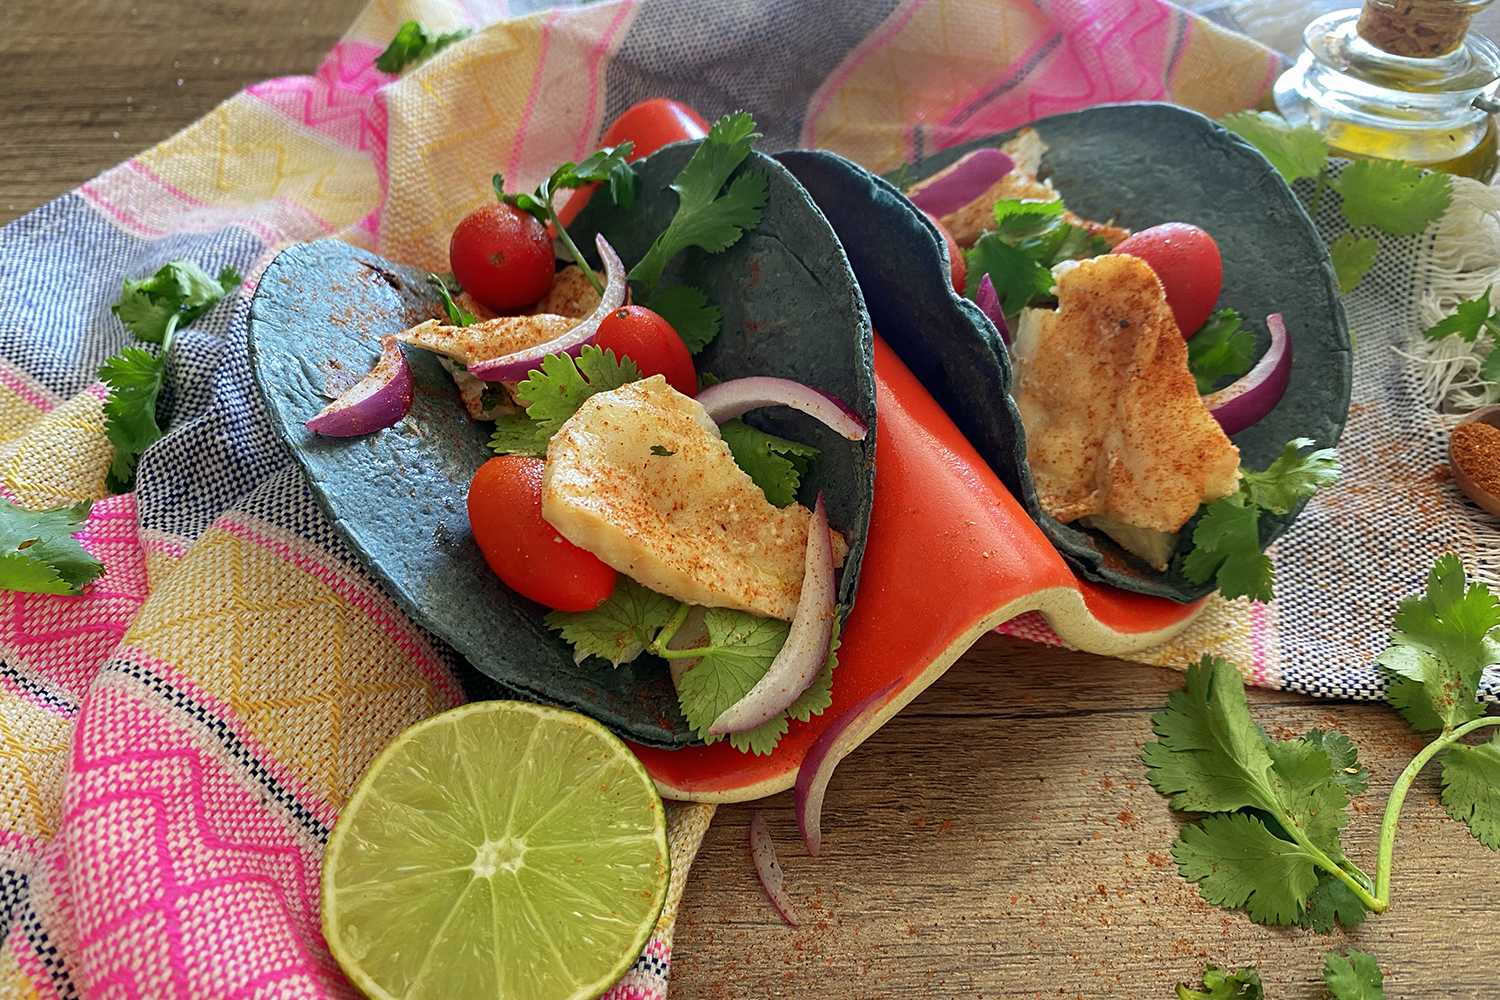 Two open tacos filled with fish pieces, cherry tomatoes, lettuce and red onion slices